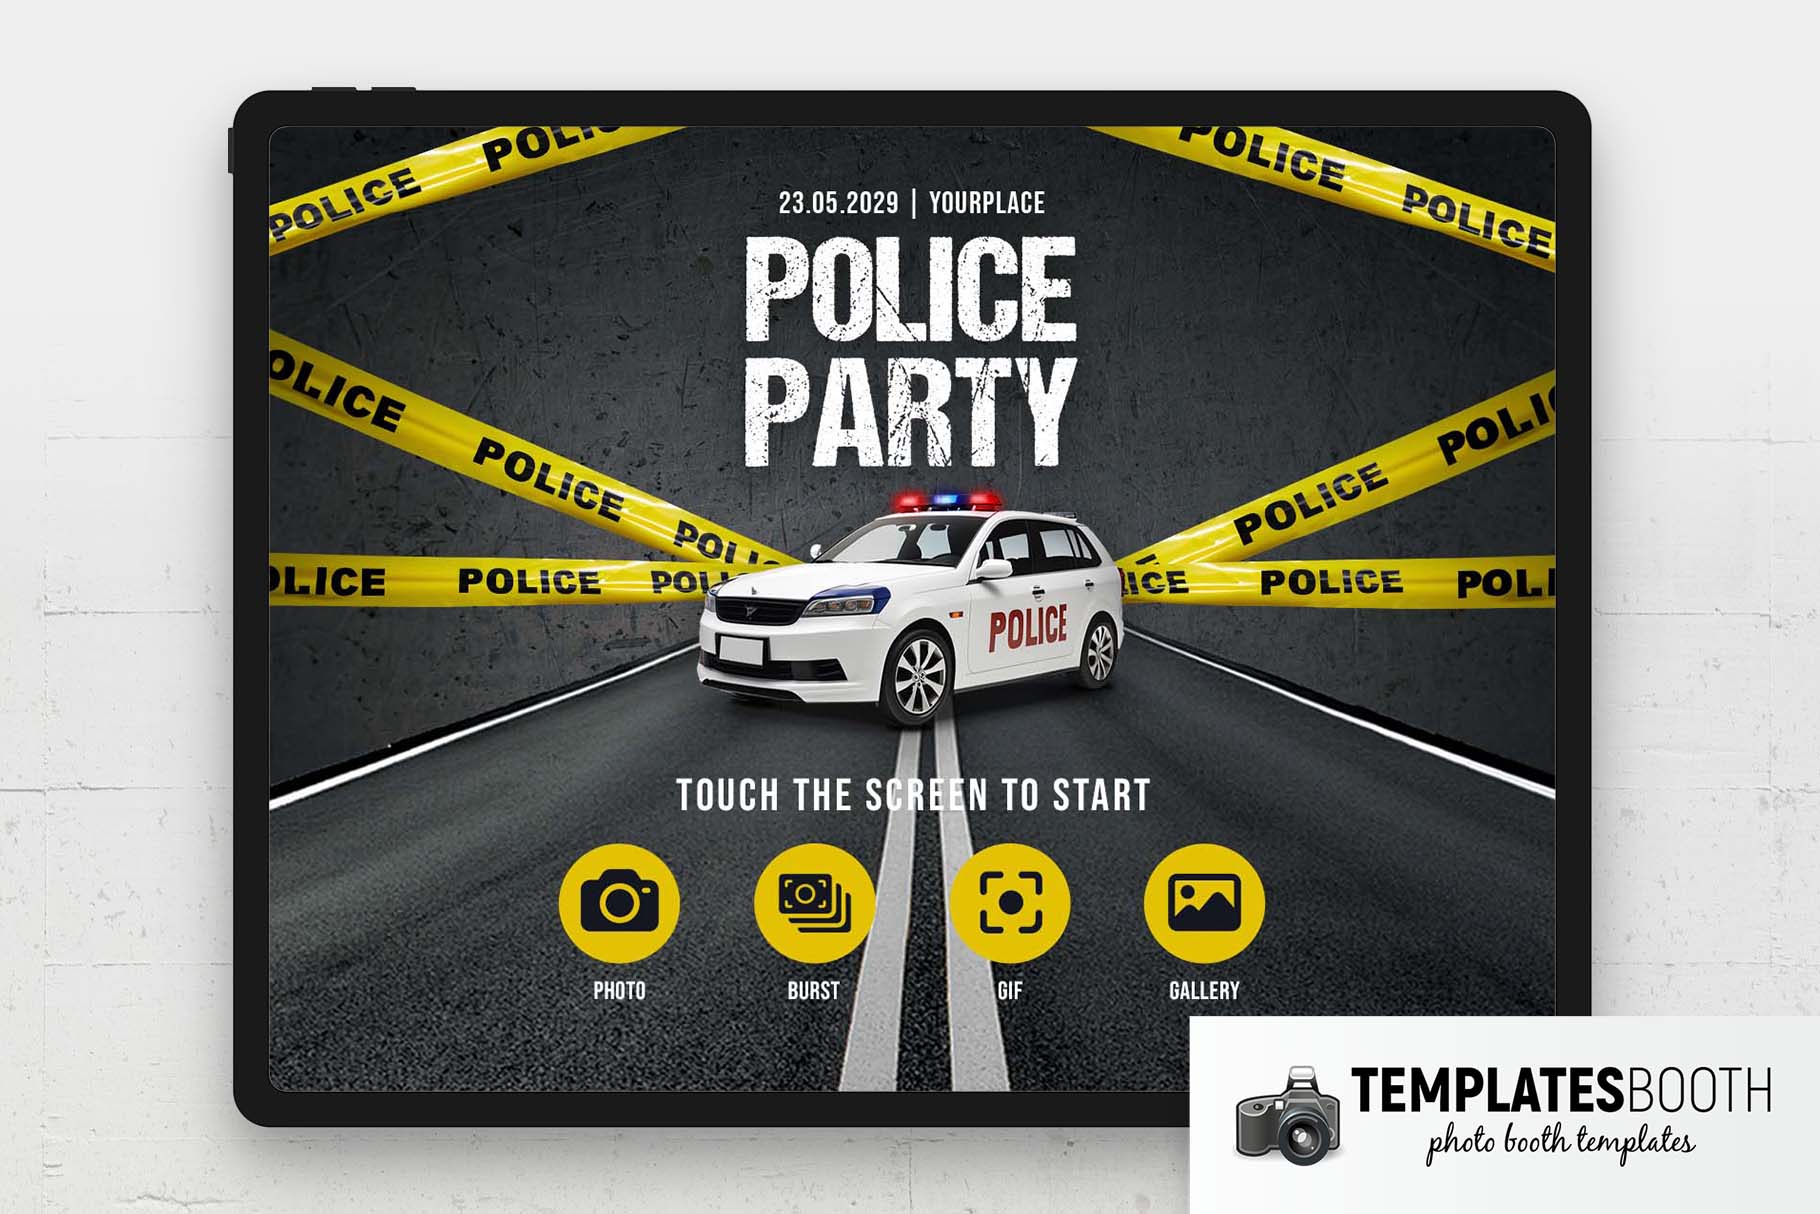 Police Party Photo Booth Welcome Screen